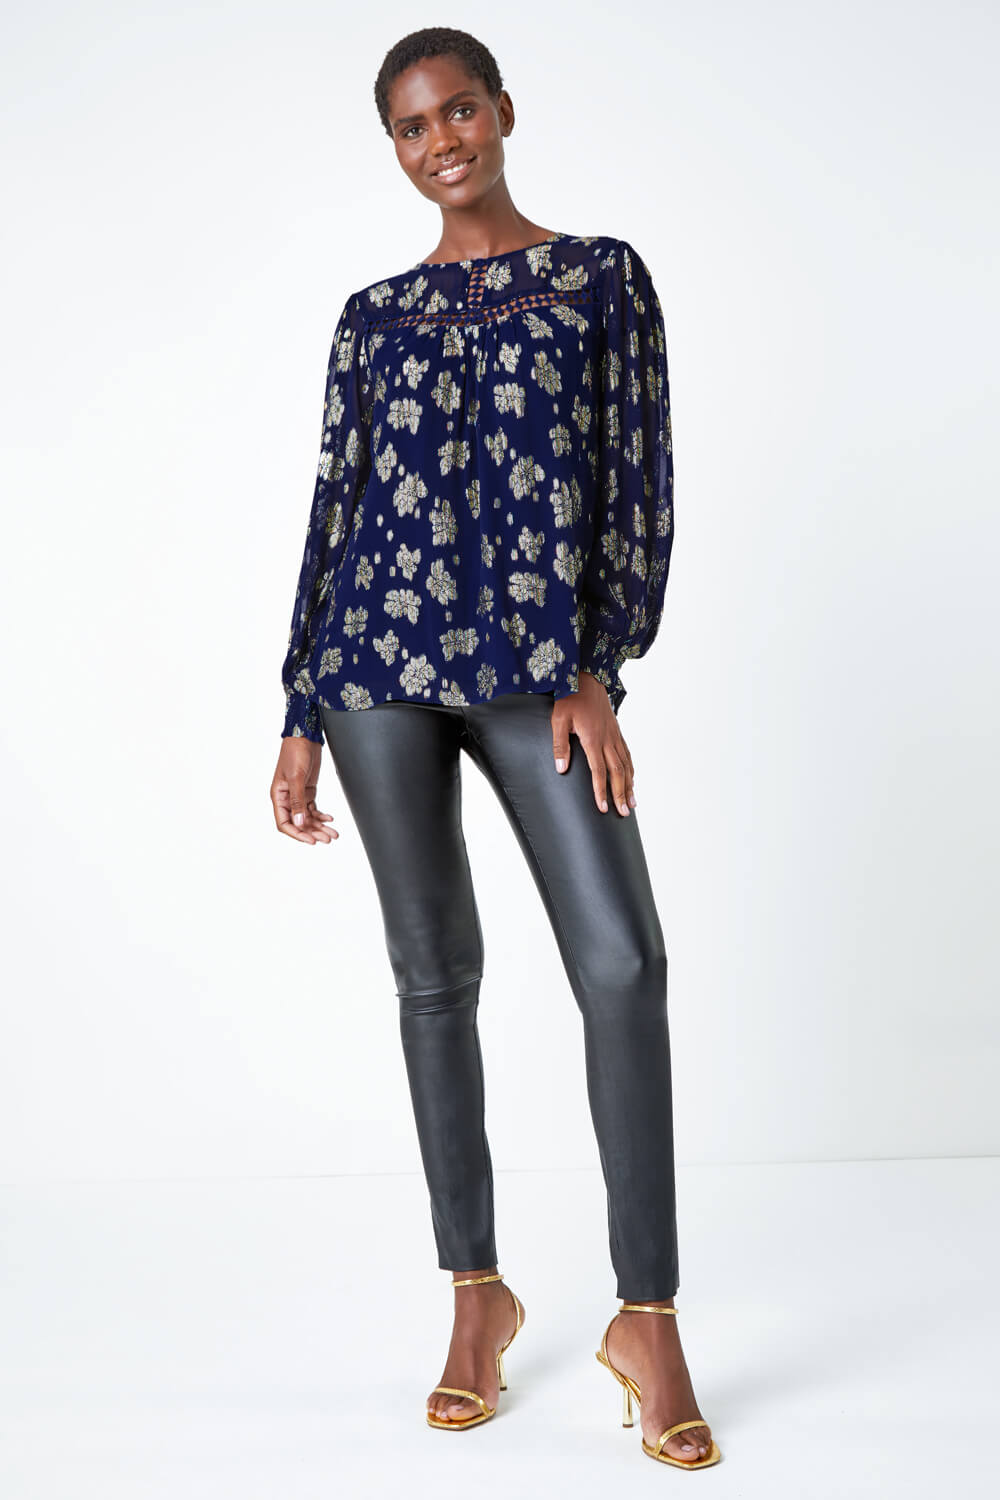 Midnight Blue Metallic Floral Print Ladder Lace Top, Image 3 of 5